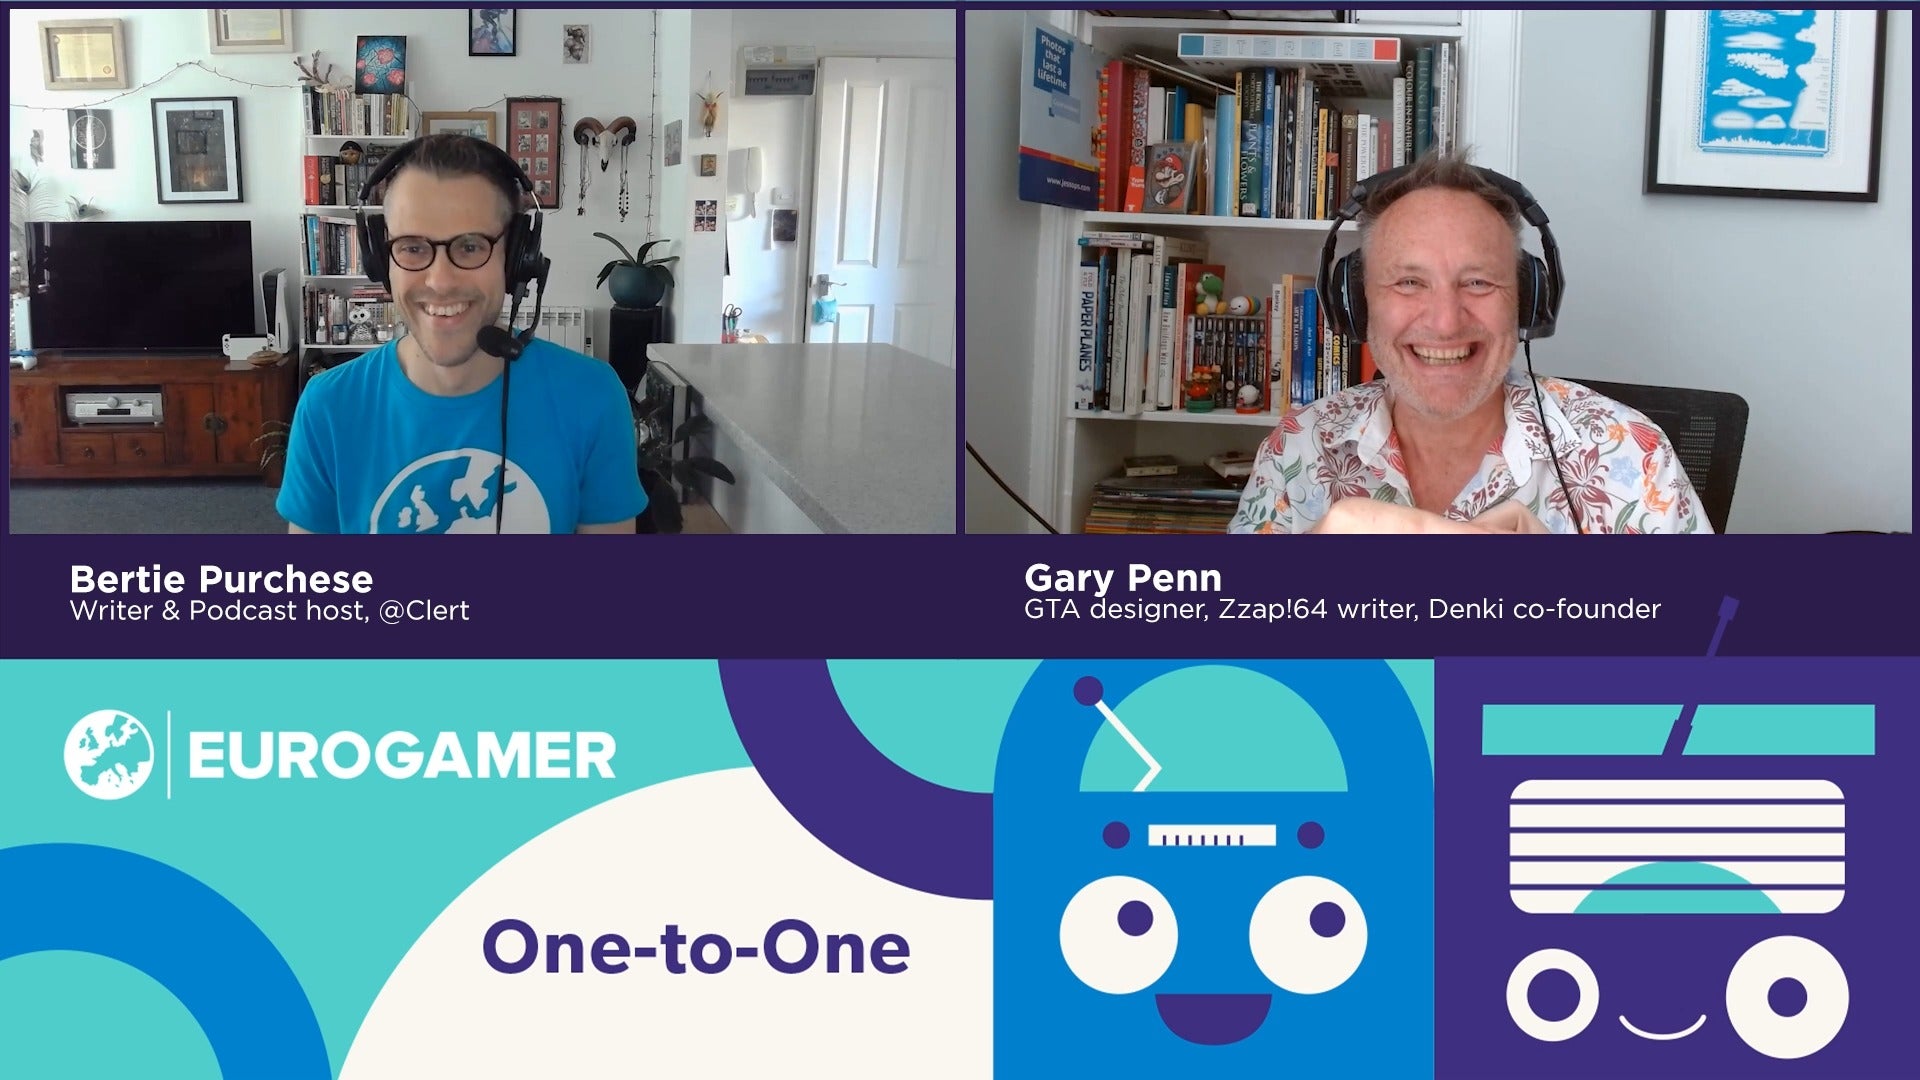 This screen is halved. One half shows the colourful One-to-one logo, which has friendly faces on radios. The other half shows two windows with video feeds in - one of host Bertie, in a blue Eurogamer t-shirt, smiling; and the other of Gary Penn in a flowery shirt, also smiling. What are they laughing at?